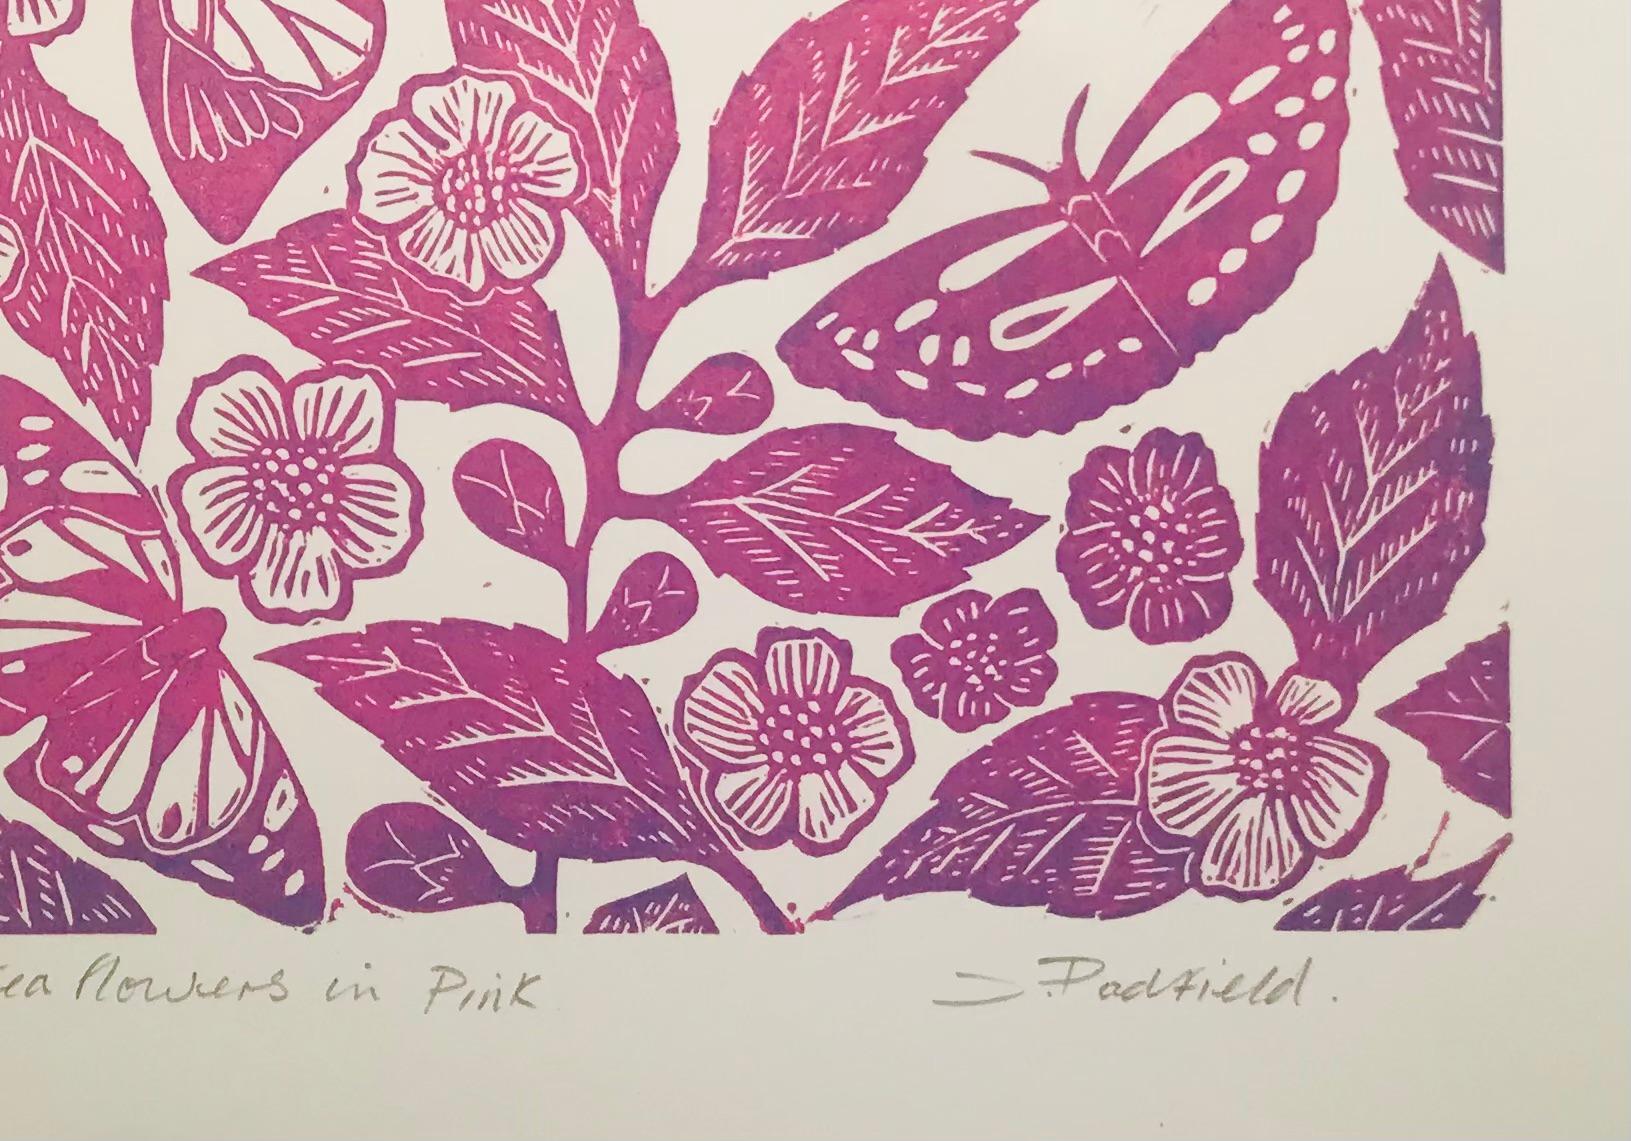 Butterflies and Tea Flowers in Pink - Print by Joanna Padfield